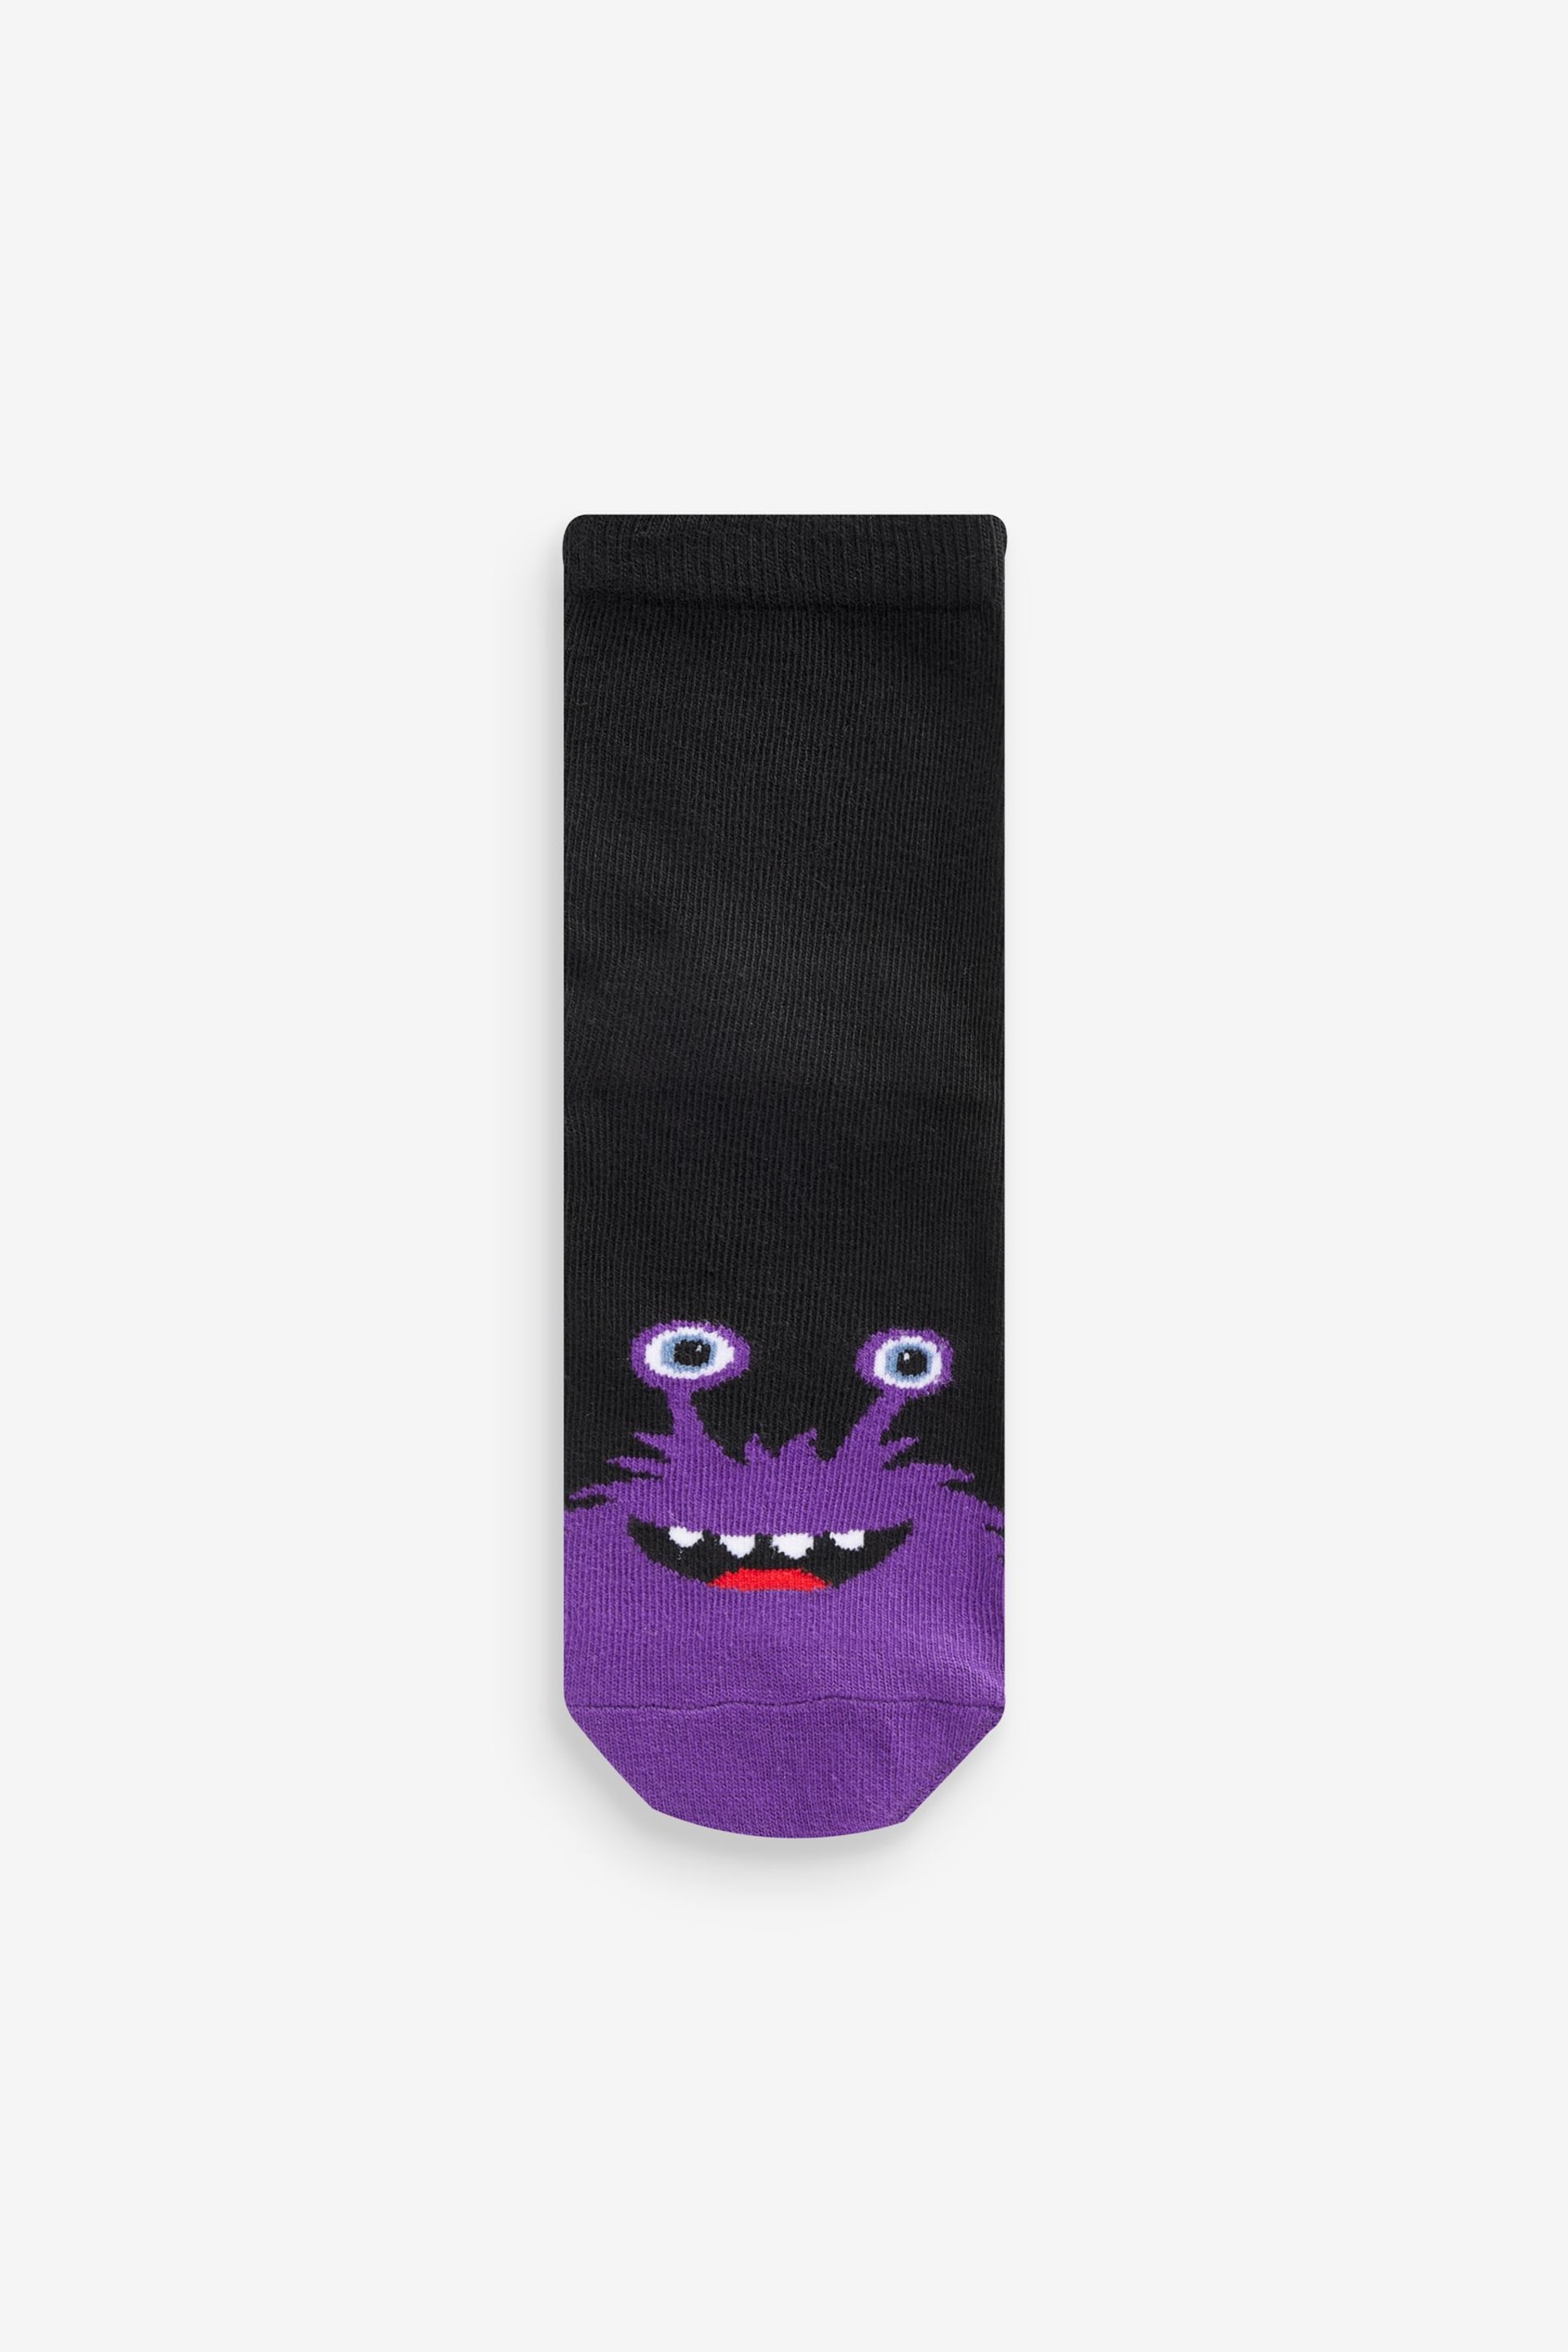 Black/Bright Monsters Cotton Rich Socks 10 Pack - Image 3 of 11